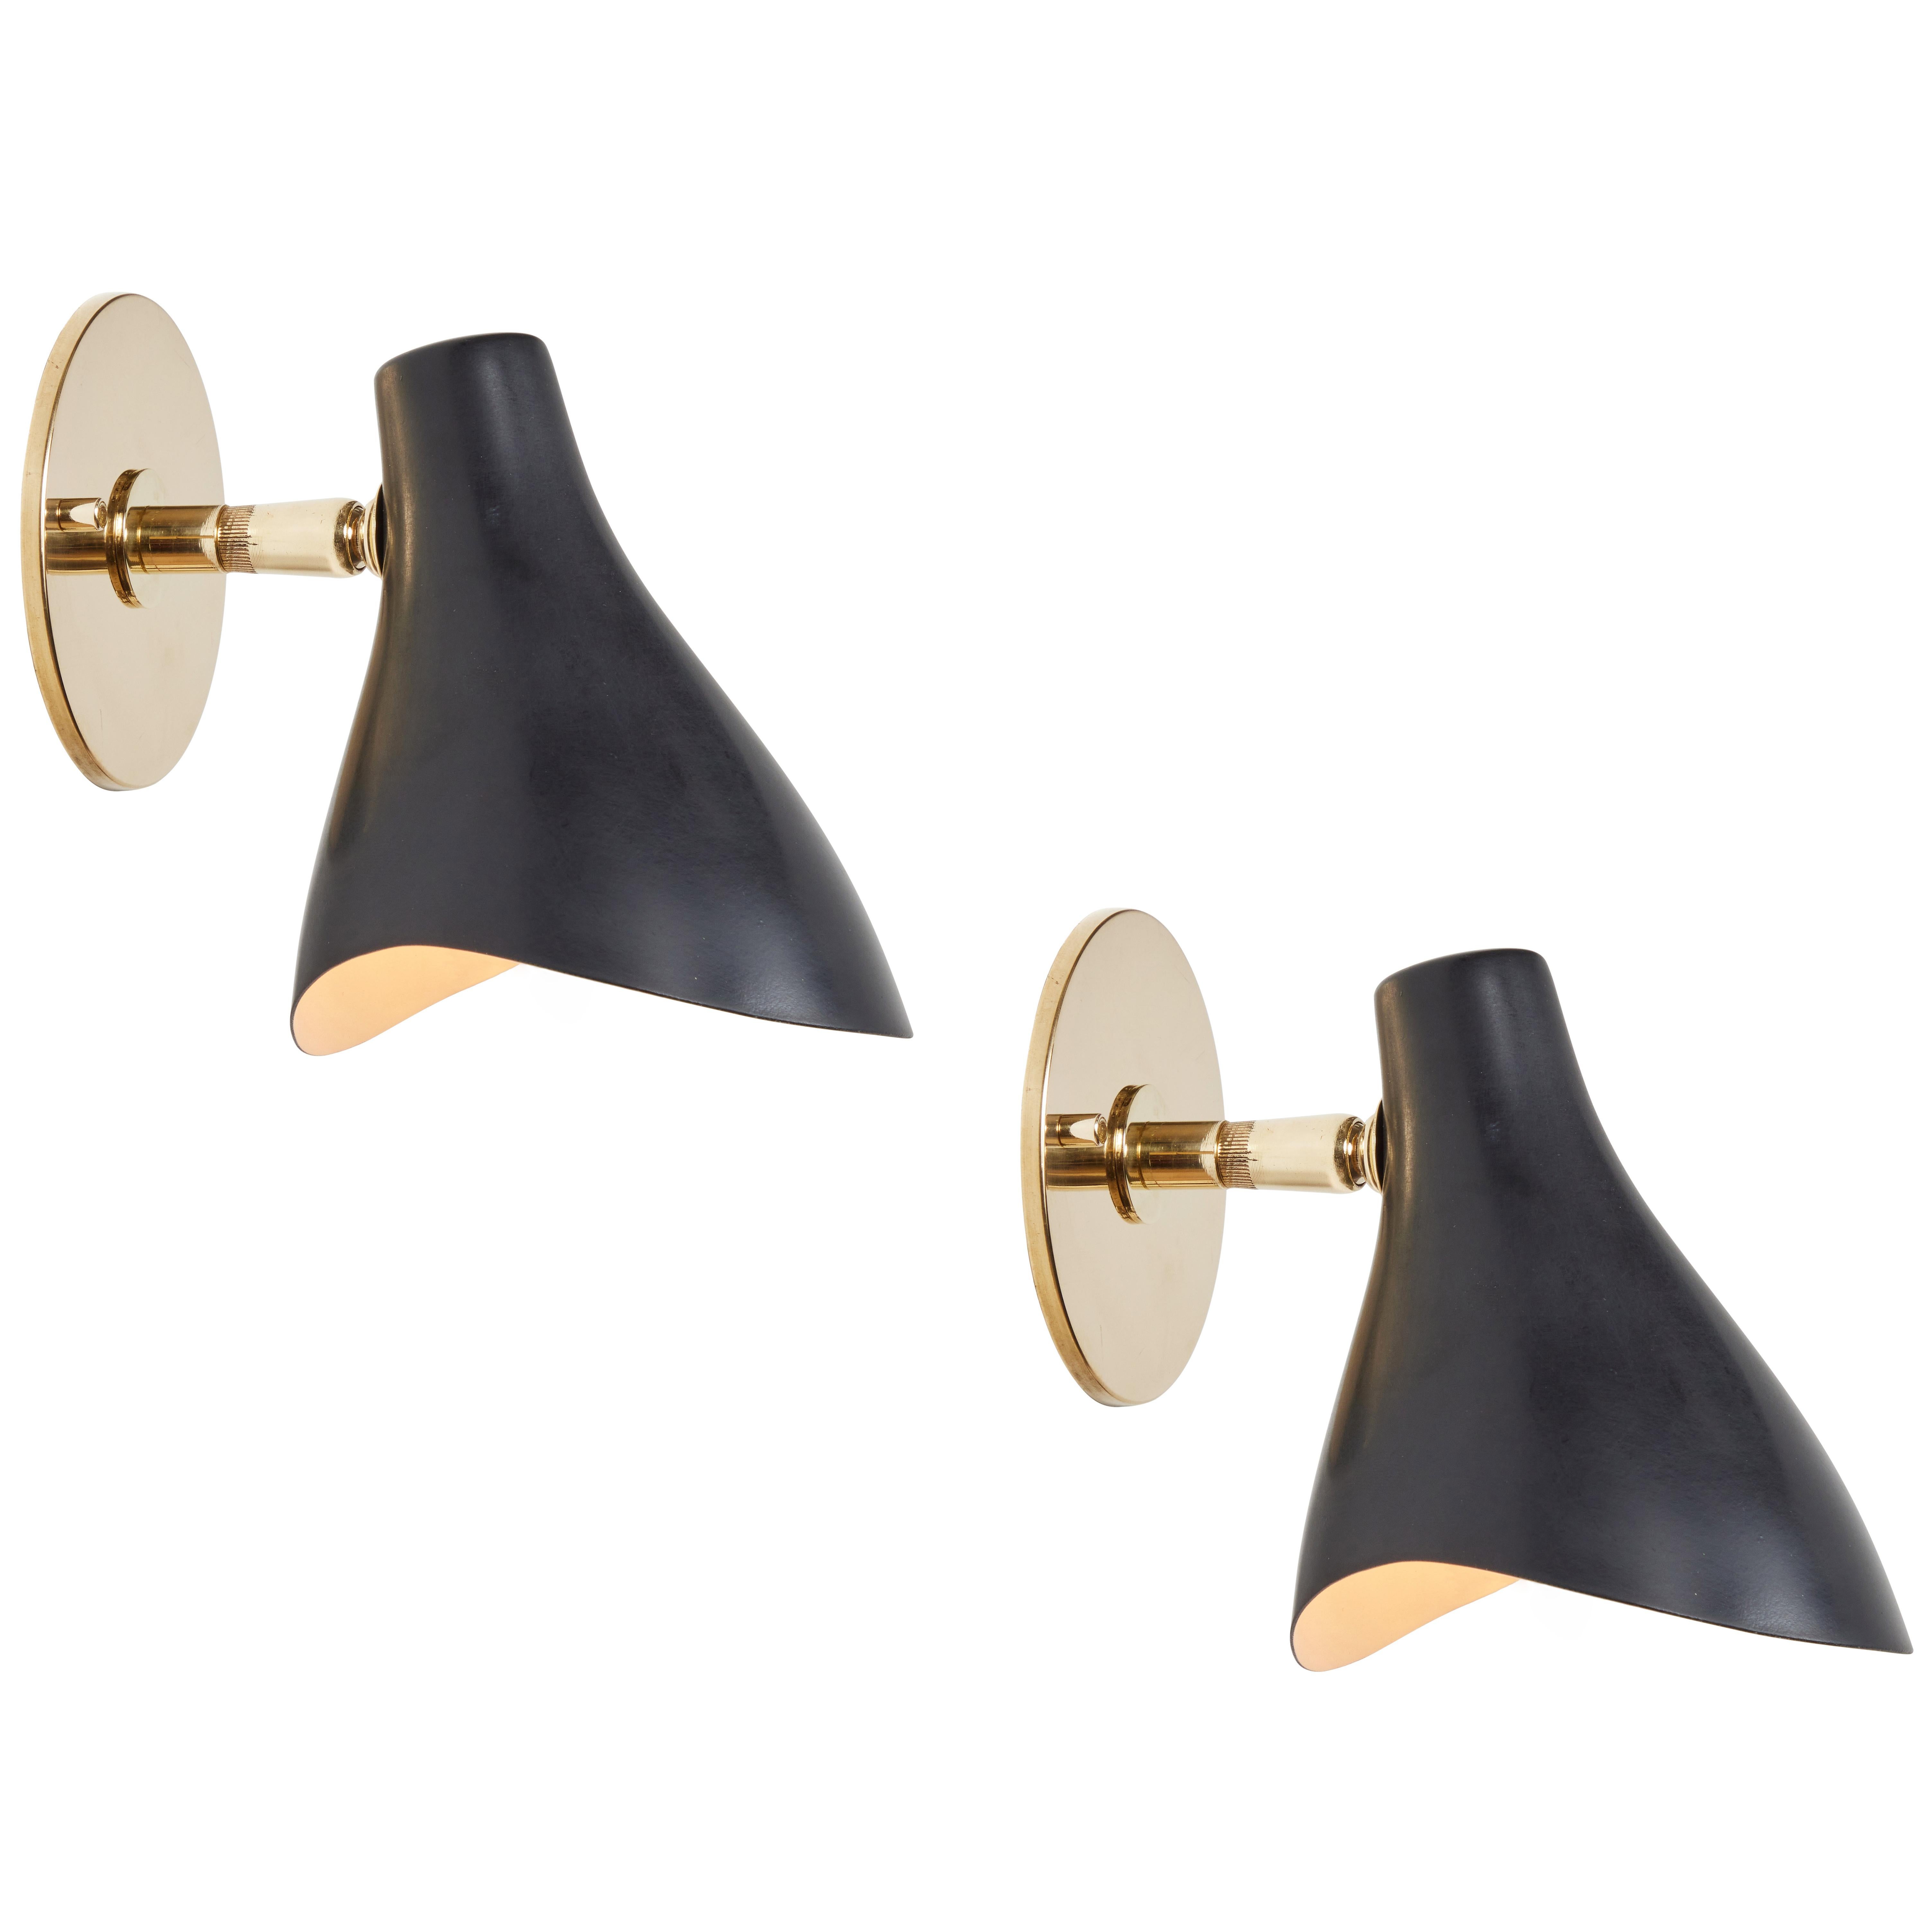 Pair of Gino Sarfatti Model #10 Sconces in Green for Arteluce In Good Condition For Sale In Glendale, CA